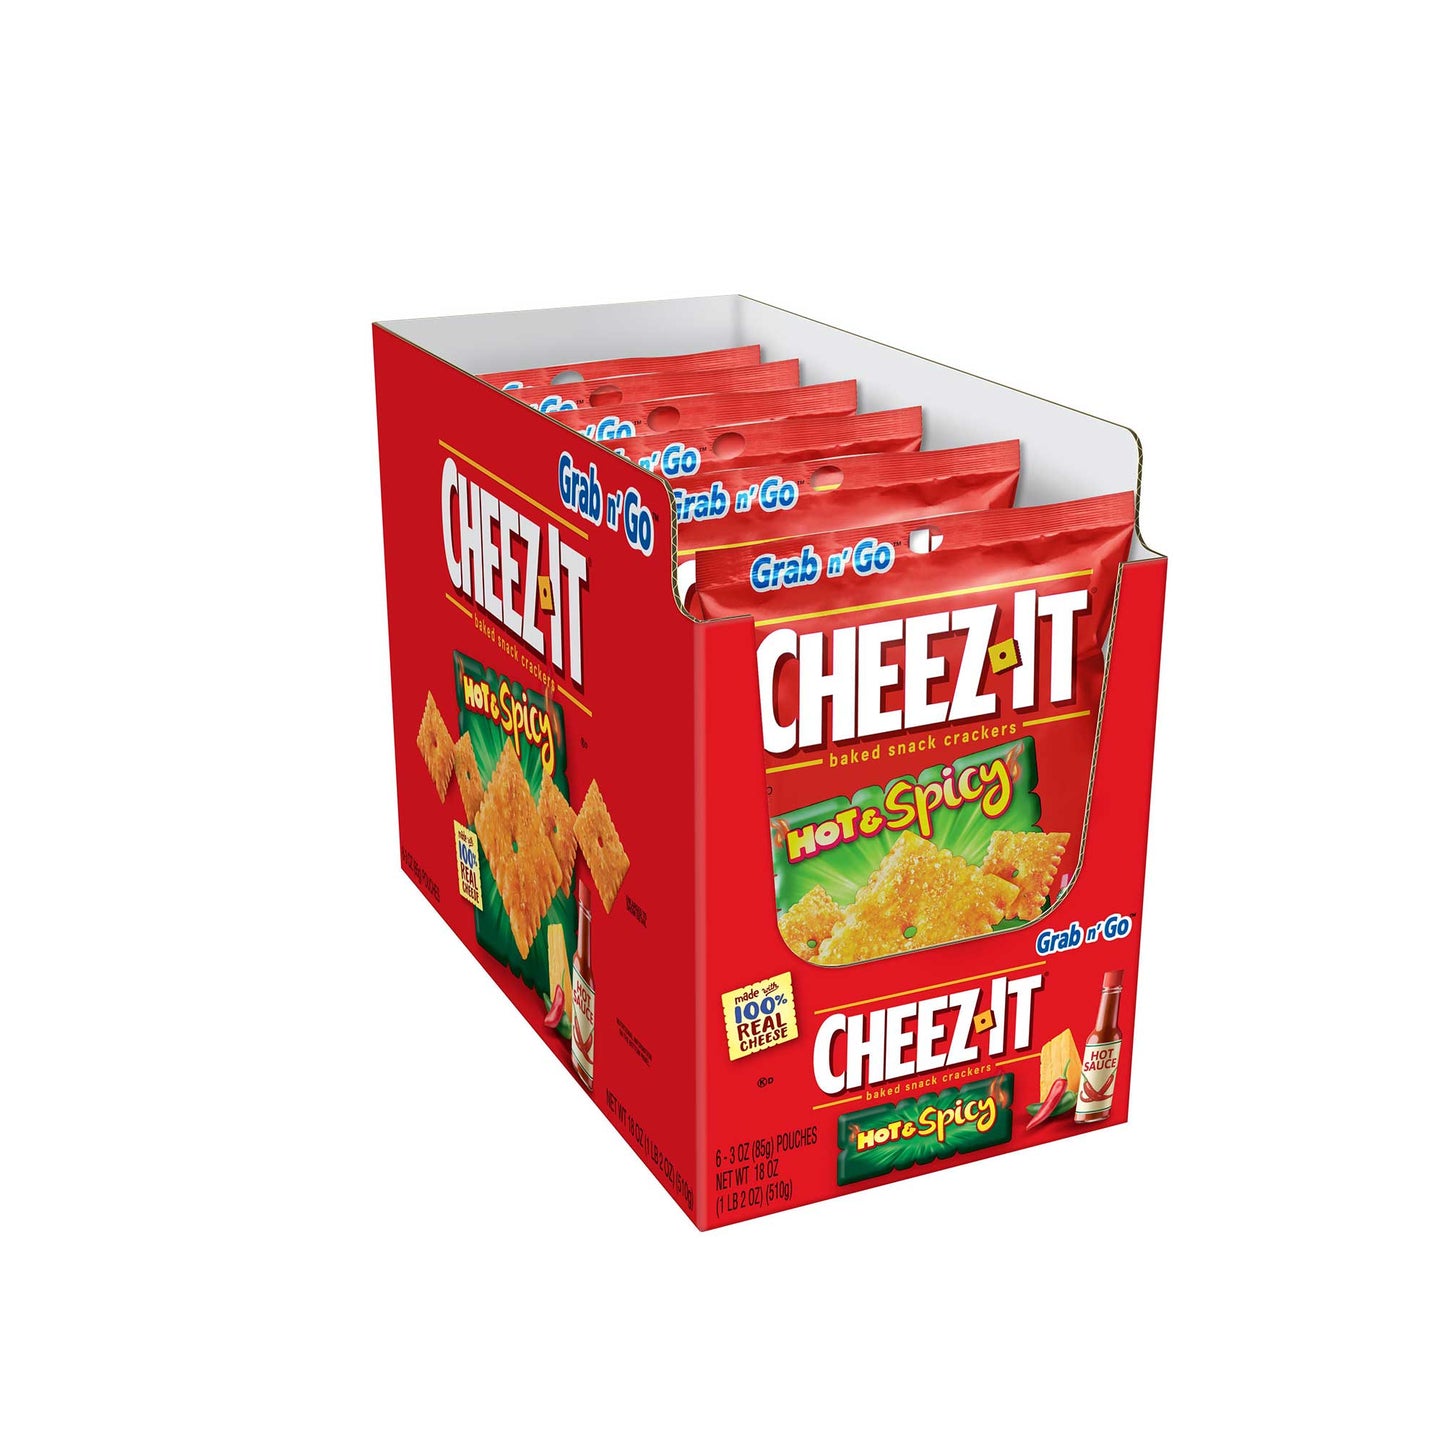 Cheez-It Hot & Spicy 3oz (Pack of 6)